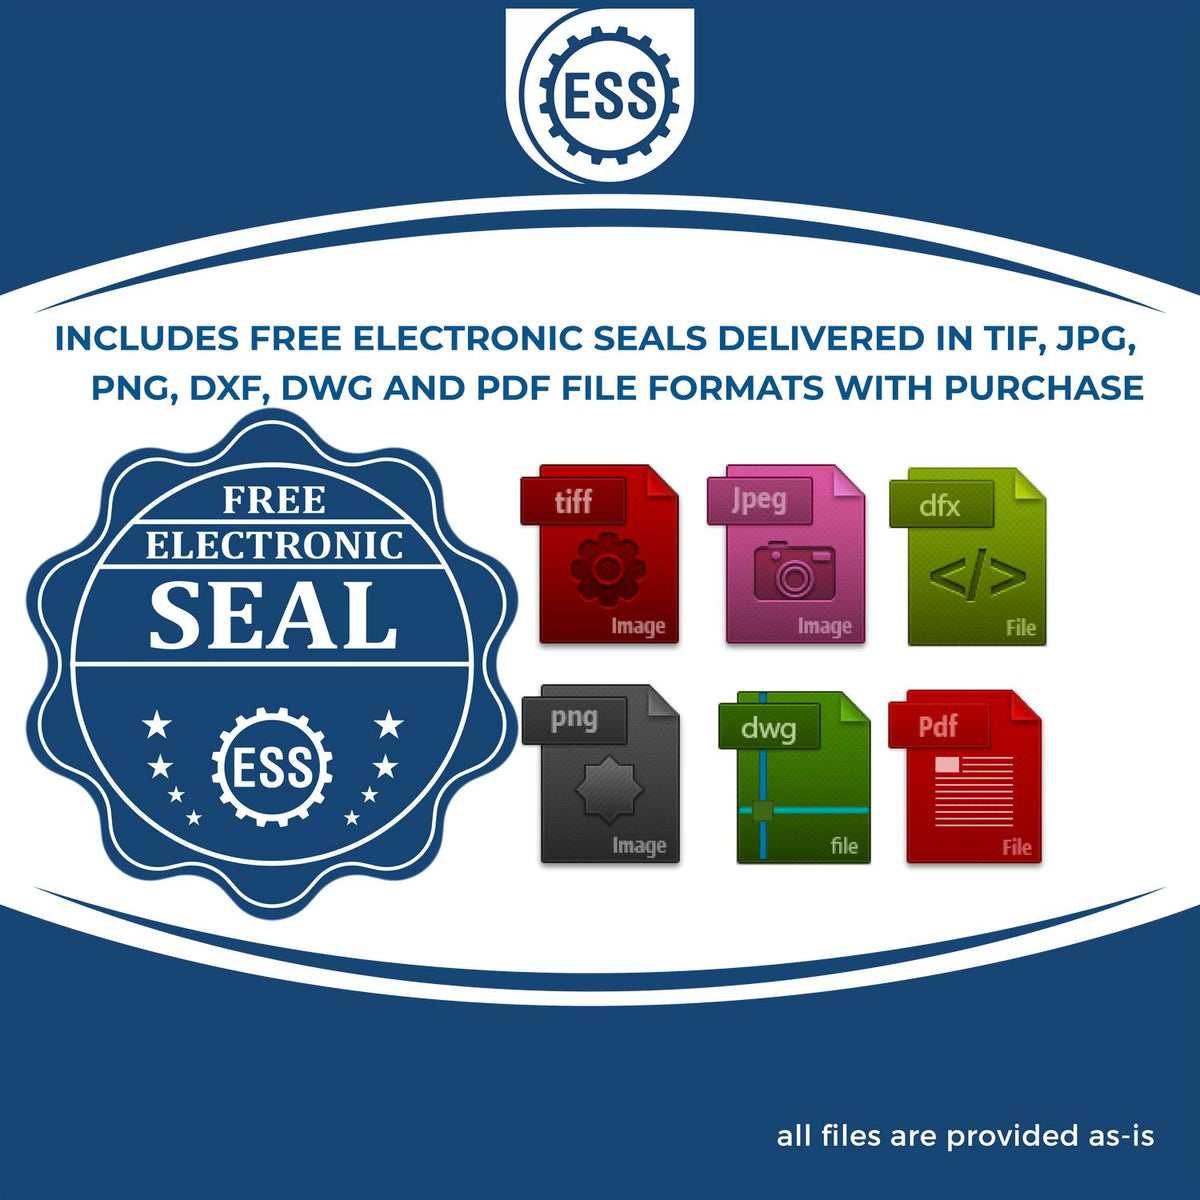 An infographic for the free electronic seal for the State of West Virginia Extended Long Reach Engineer Seal illustrating the different file type icons such as DXF, DWG, TIF, JPG and PNG.